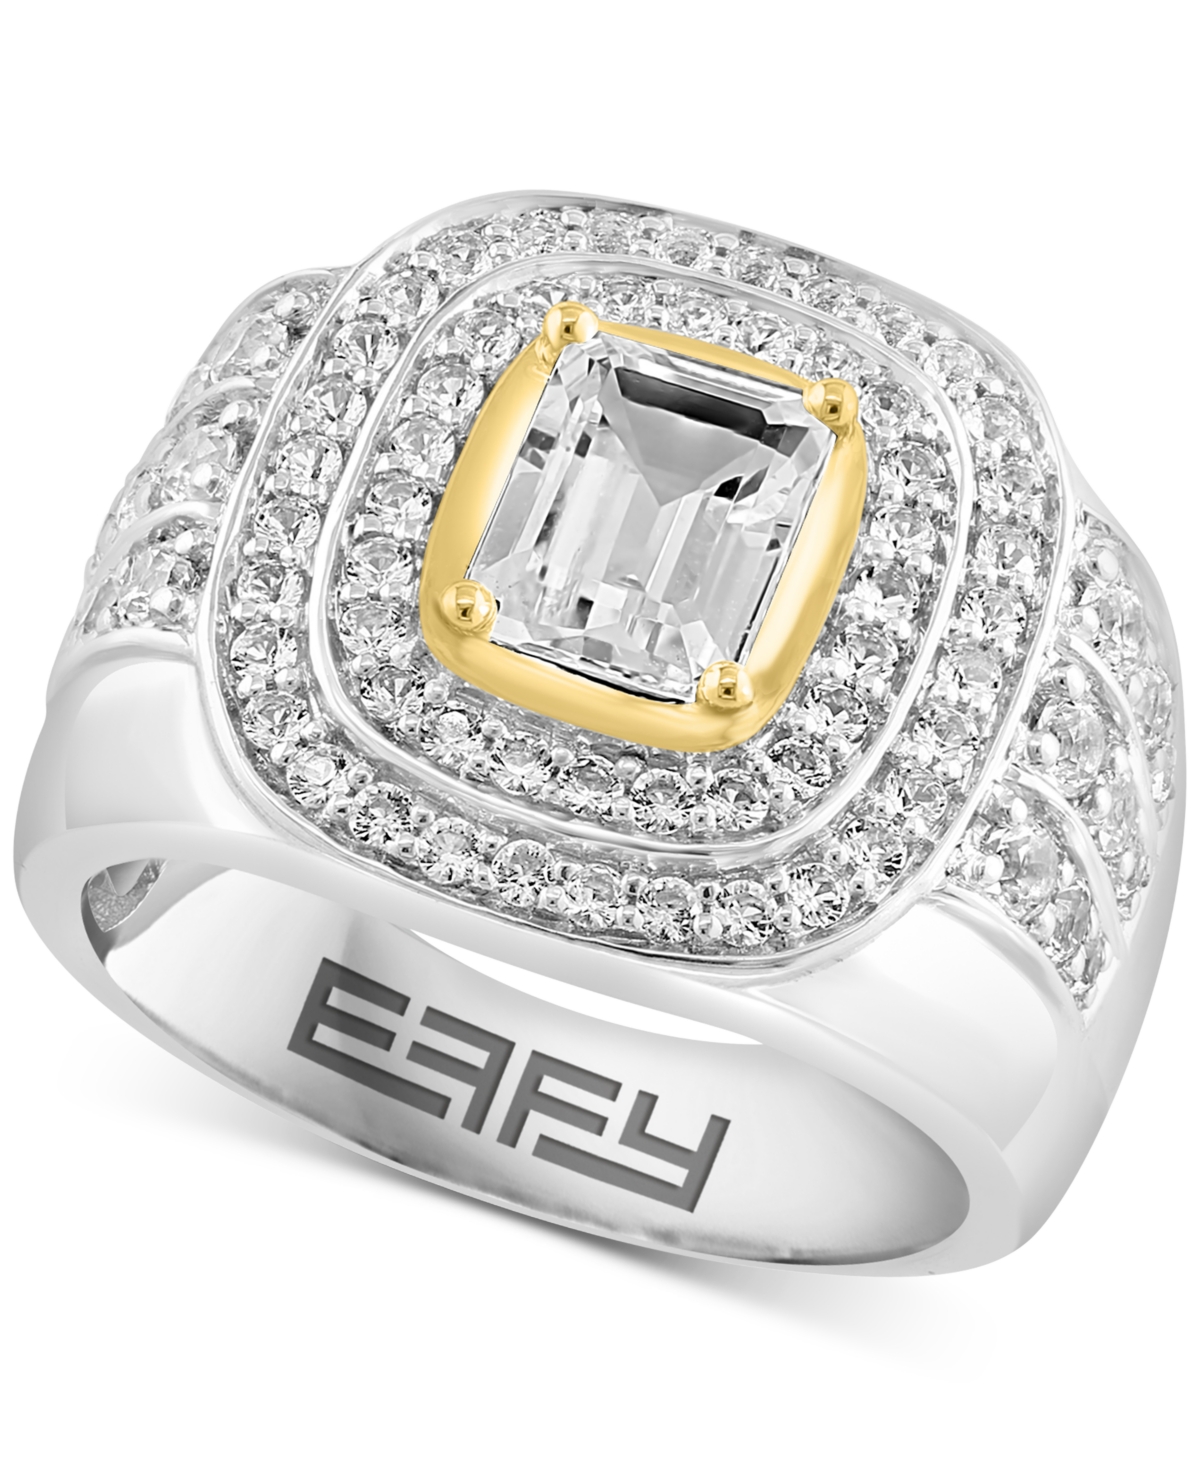 Effy Men's White Topaz Halo Cluster Ring (3 ct. t.w.) in Sterling Silver & 14k Gold-Plate - Silver